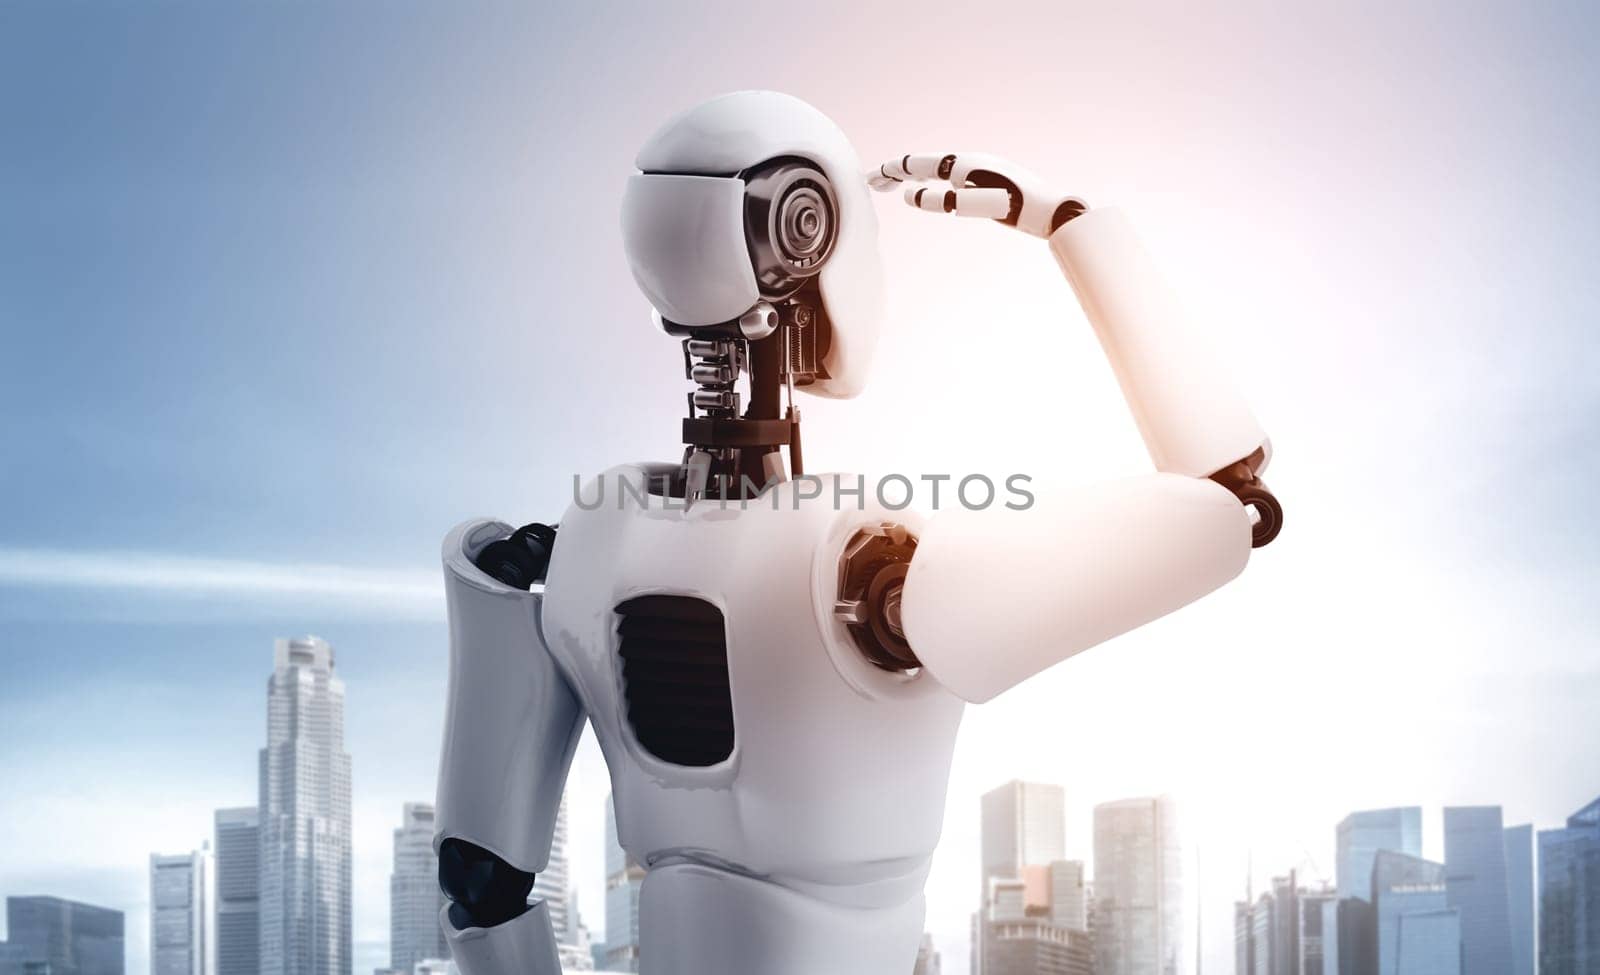 XAI 3d illustration 3D illustration robot humanoid looking forward against cityscape skyline. Concept of leadership, idea and vision for futuristic development of artificial intelligence AI.